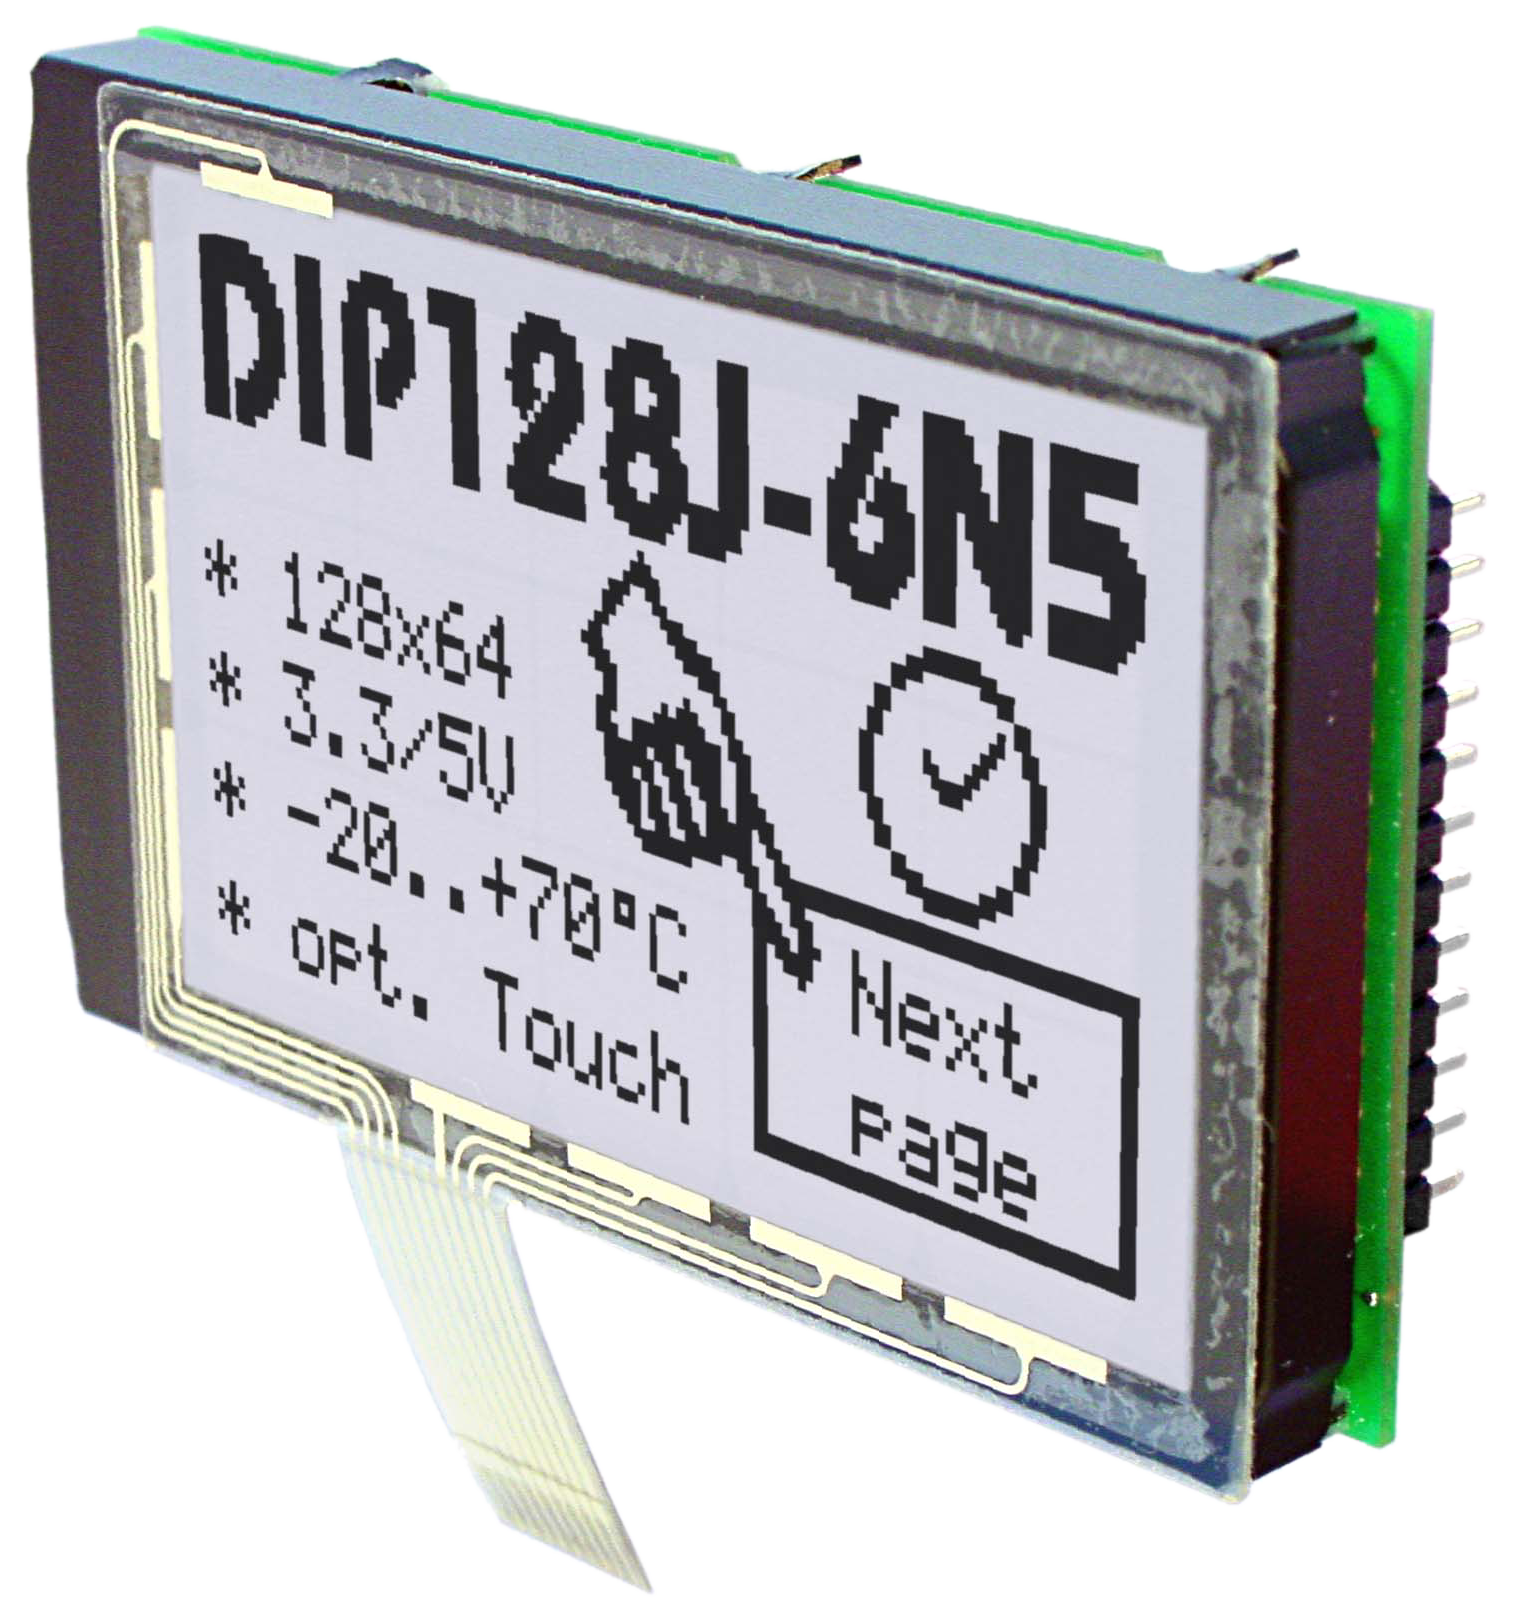 Displays in Chip on Board LCD (COB) Technic, here EA DIP128 as a graphic display with 128x64 pixels